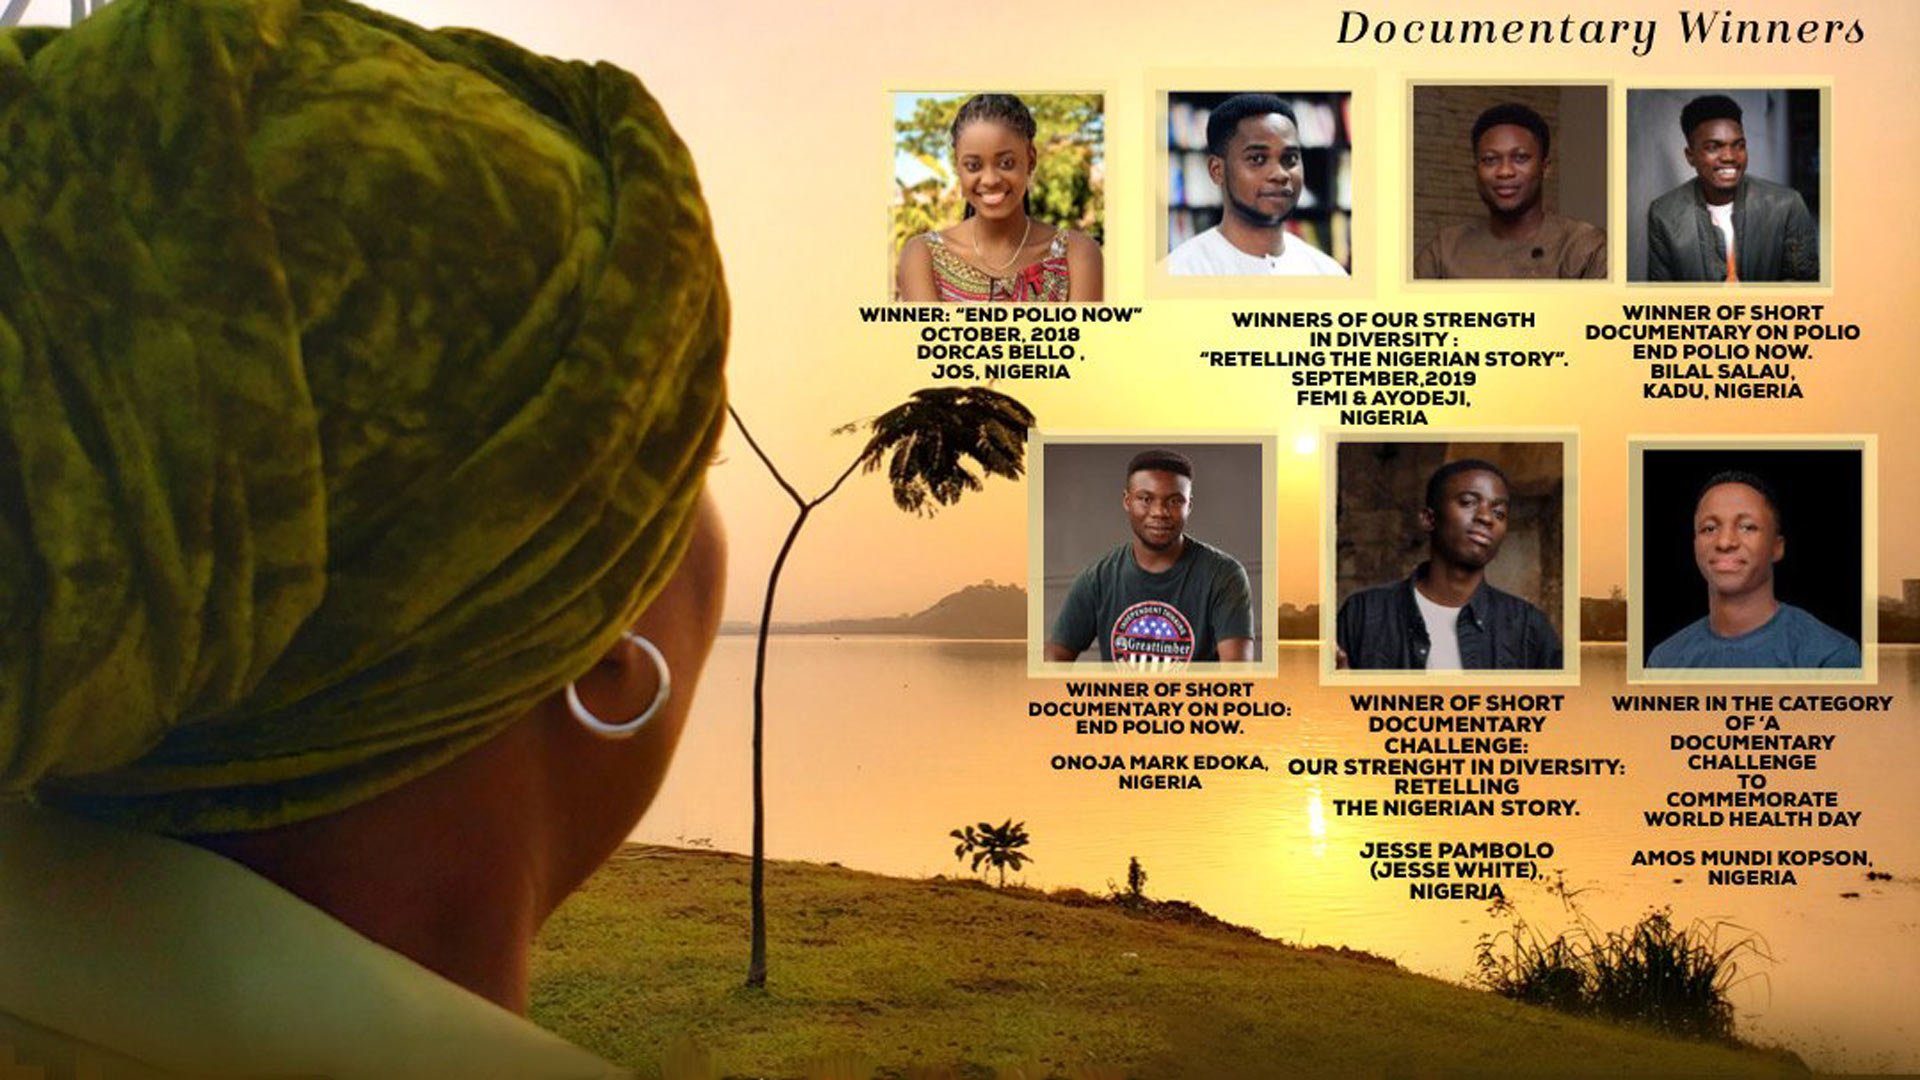 African woman looking out into a body of water.  Faces of directors and their titles are overlayed